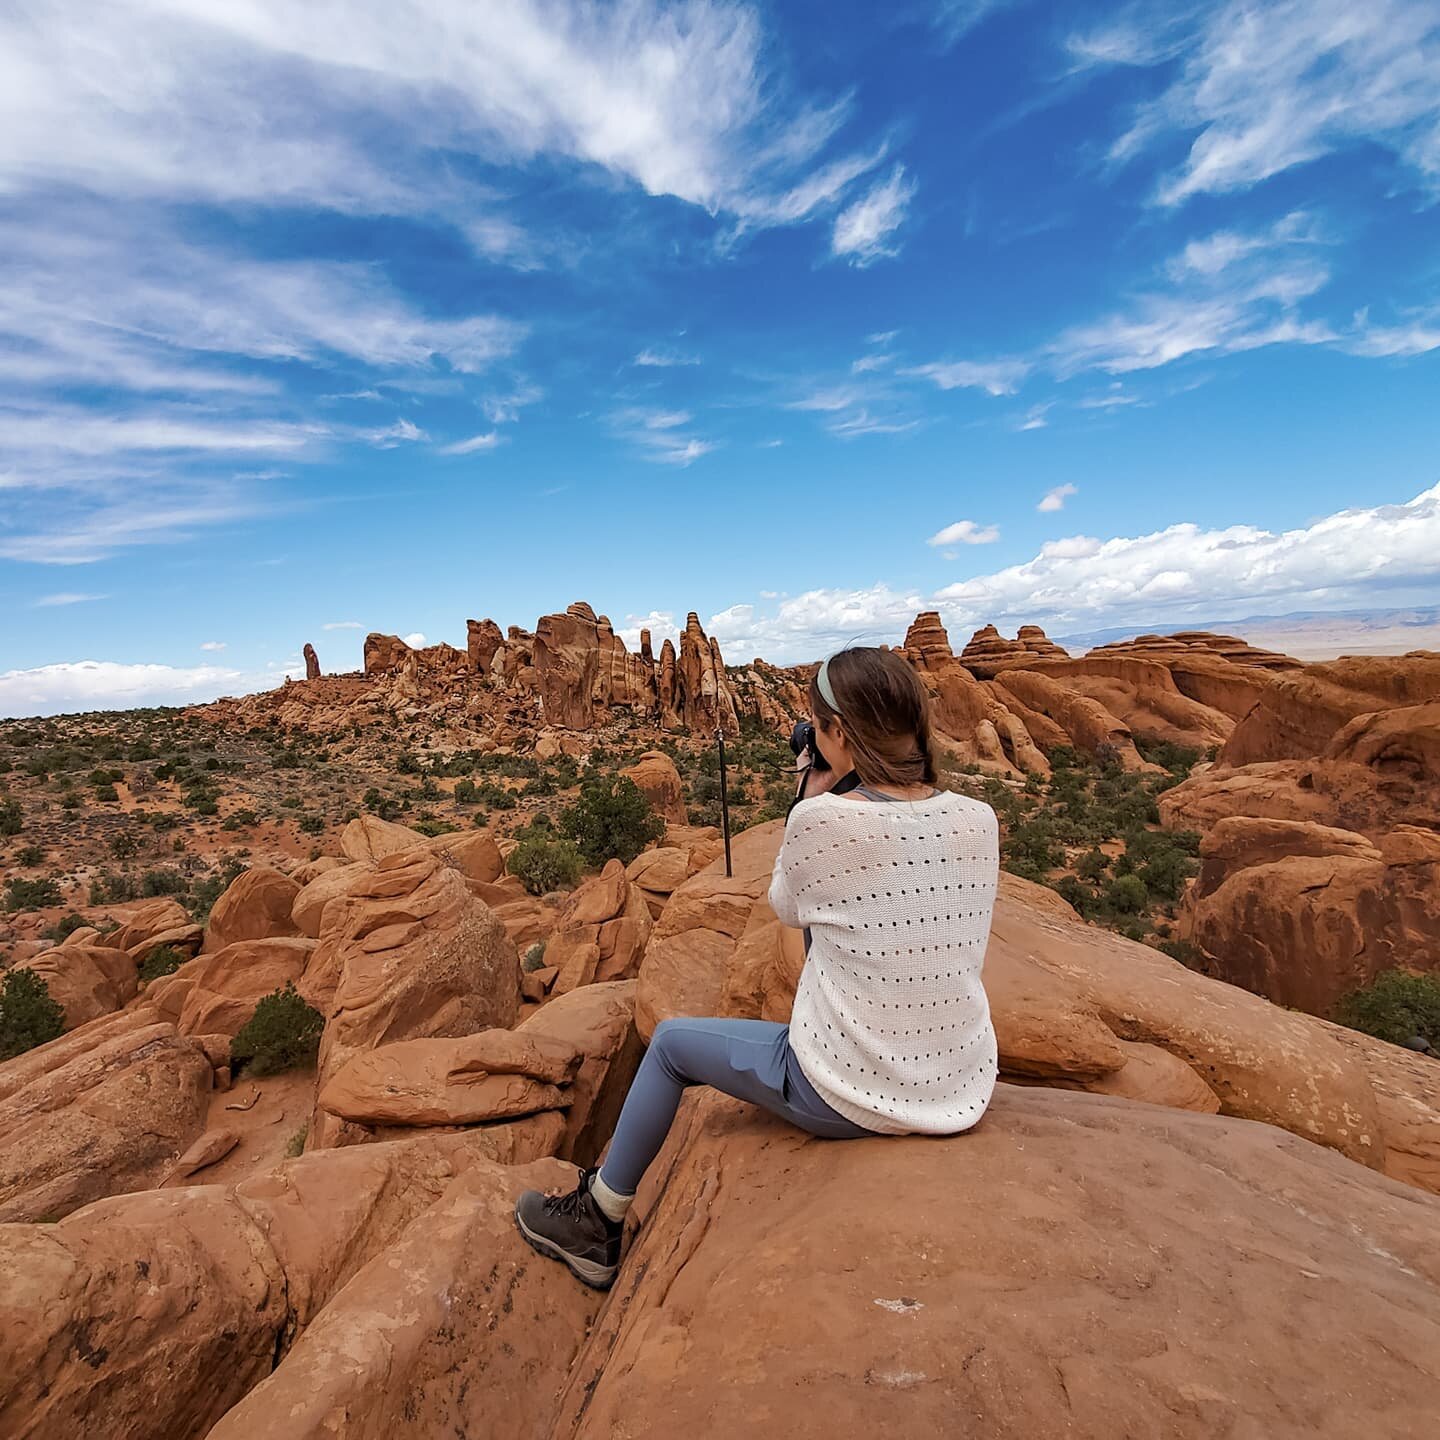 *Save for visiting Arches National Park*

Is Arches on your bucket list? You'll want to go bookmark the blog post I just published (link in bio). It has tips plus 4 different ways to spend a day in park, depending on how adventurous you're feeling!

